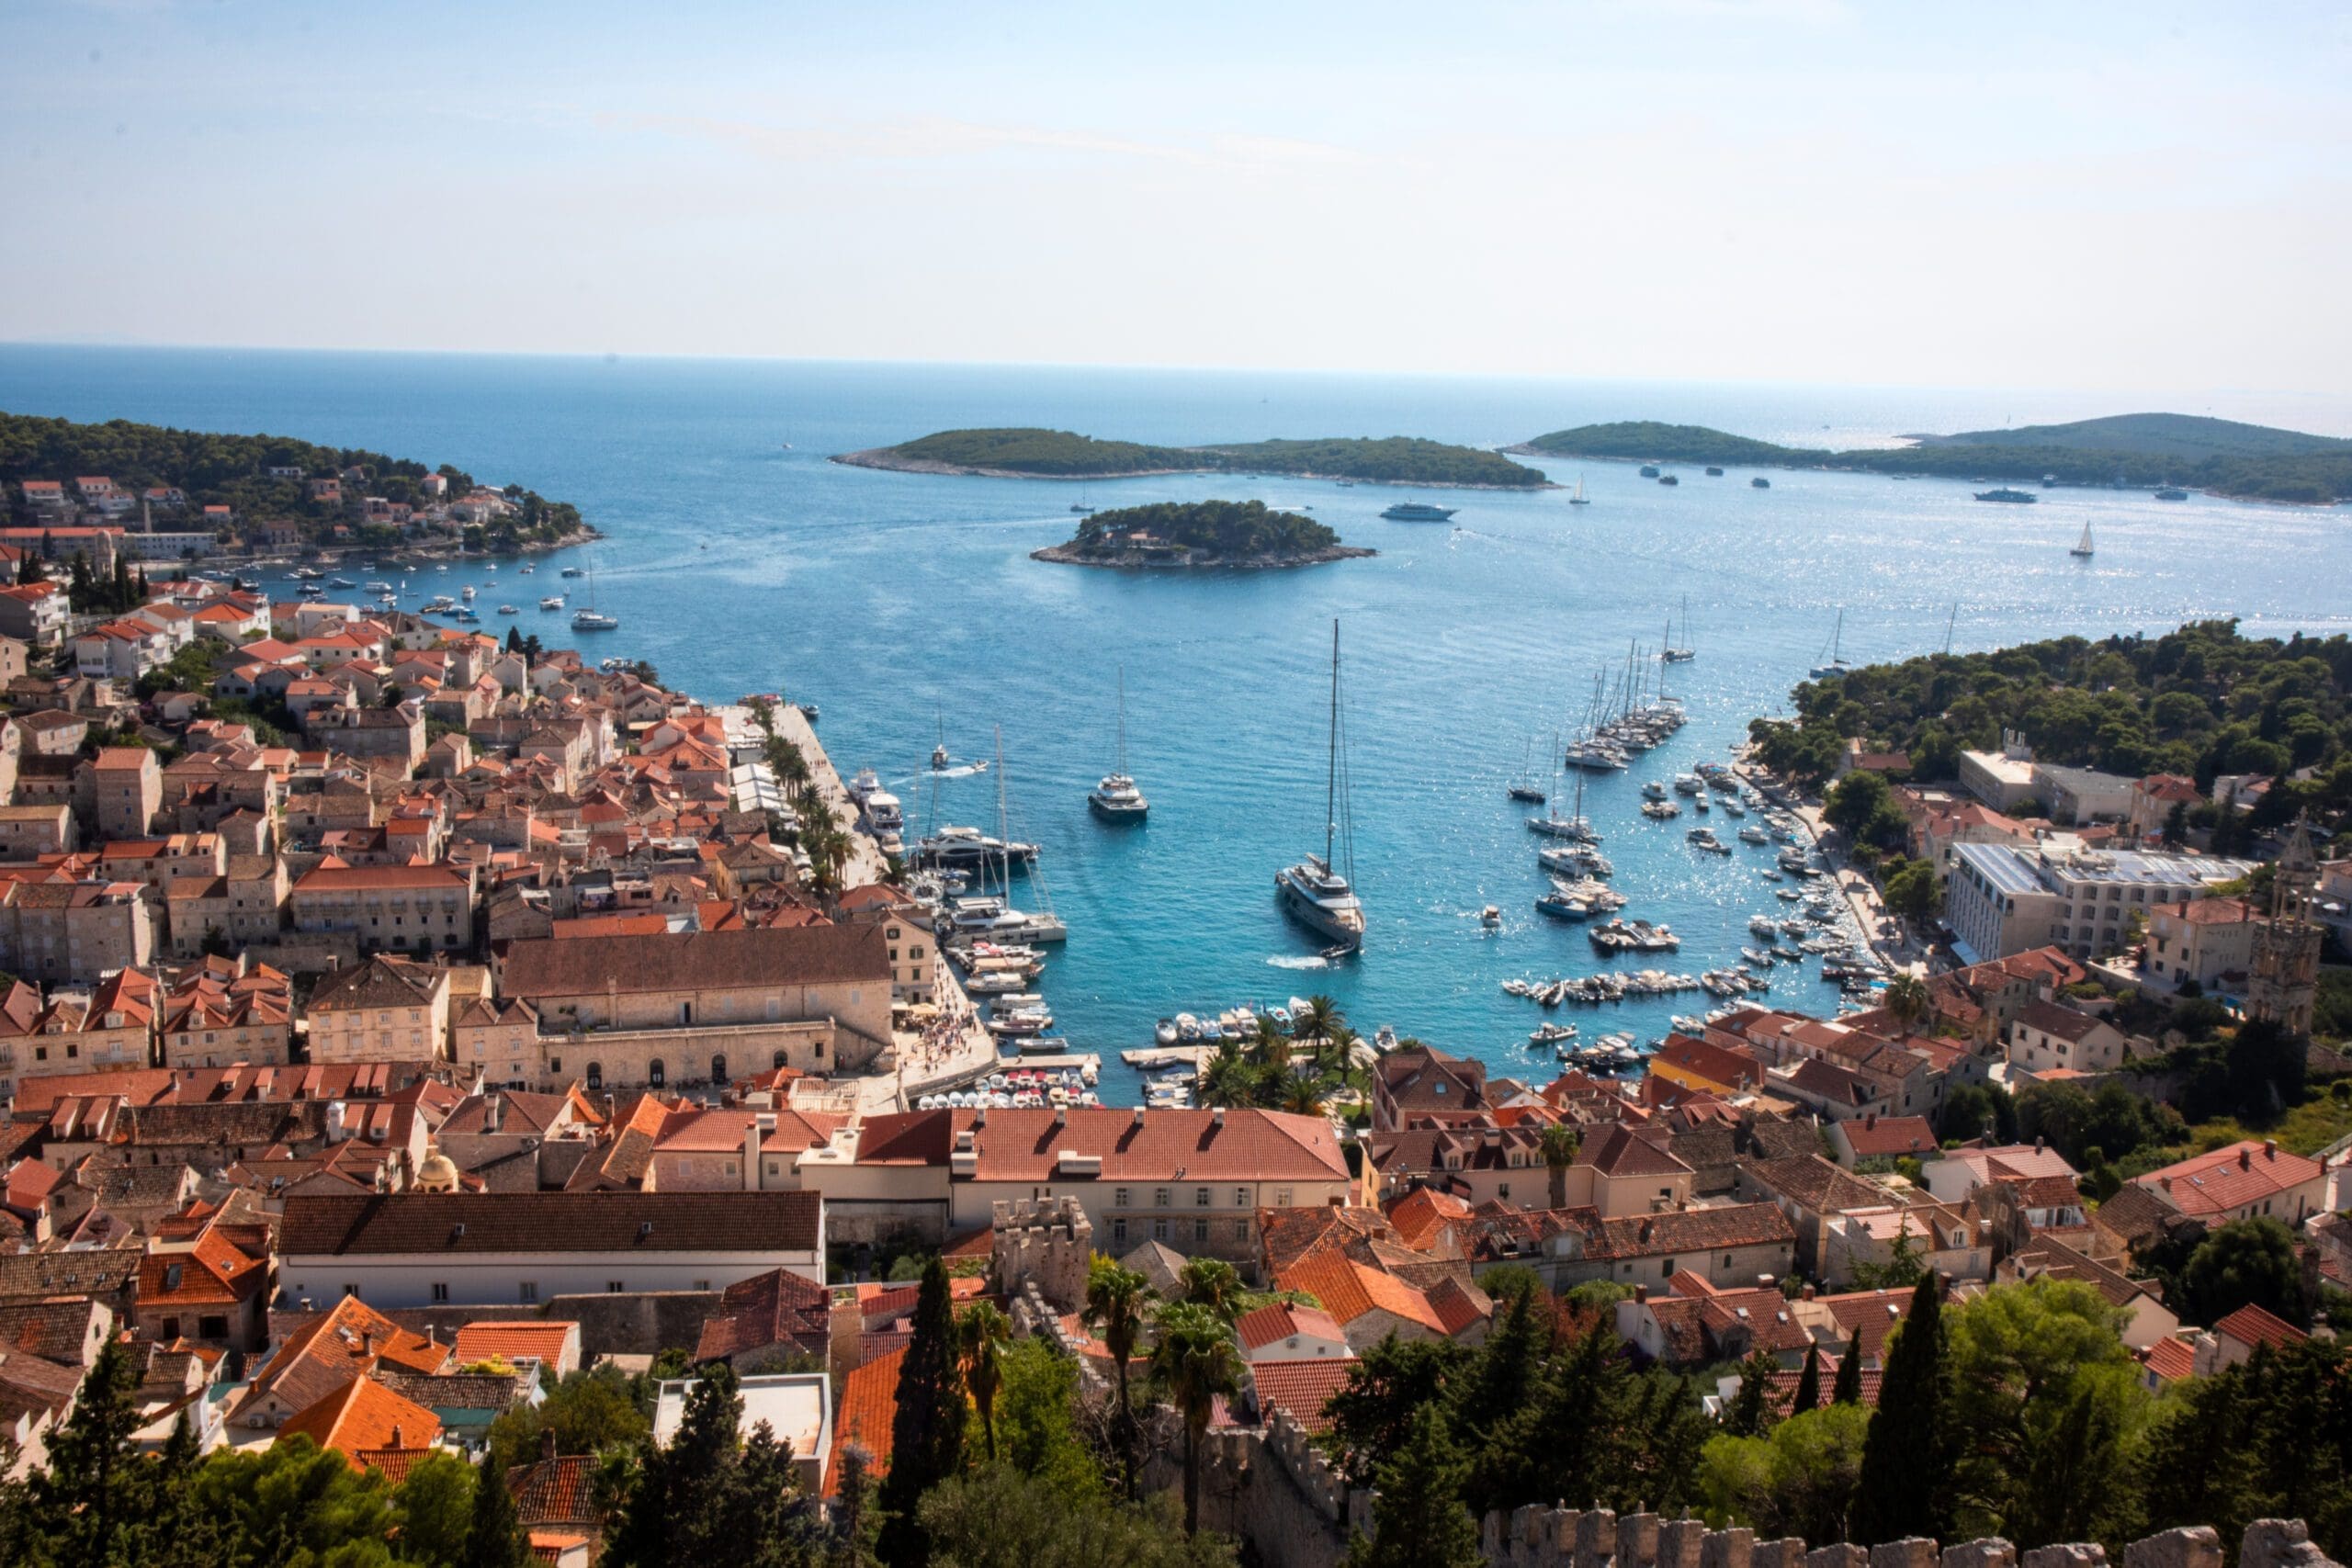 Views of Hvar from the Castle